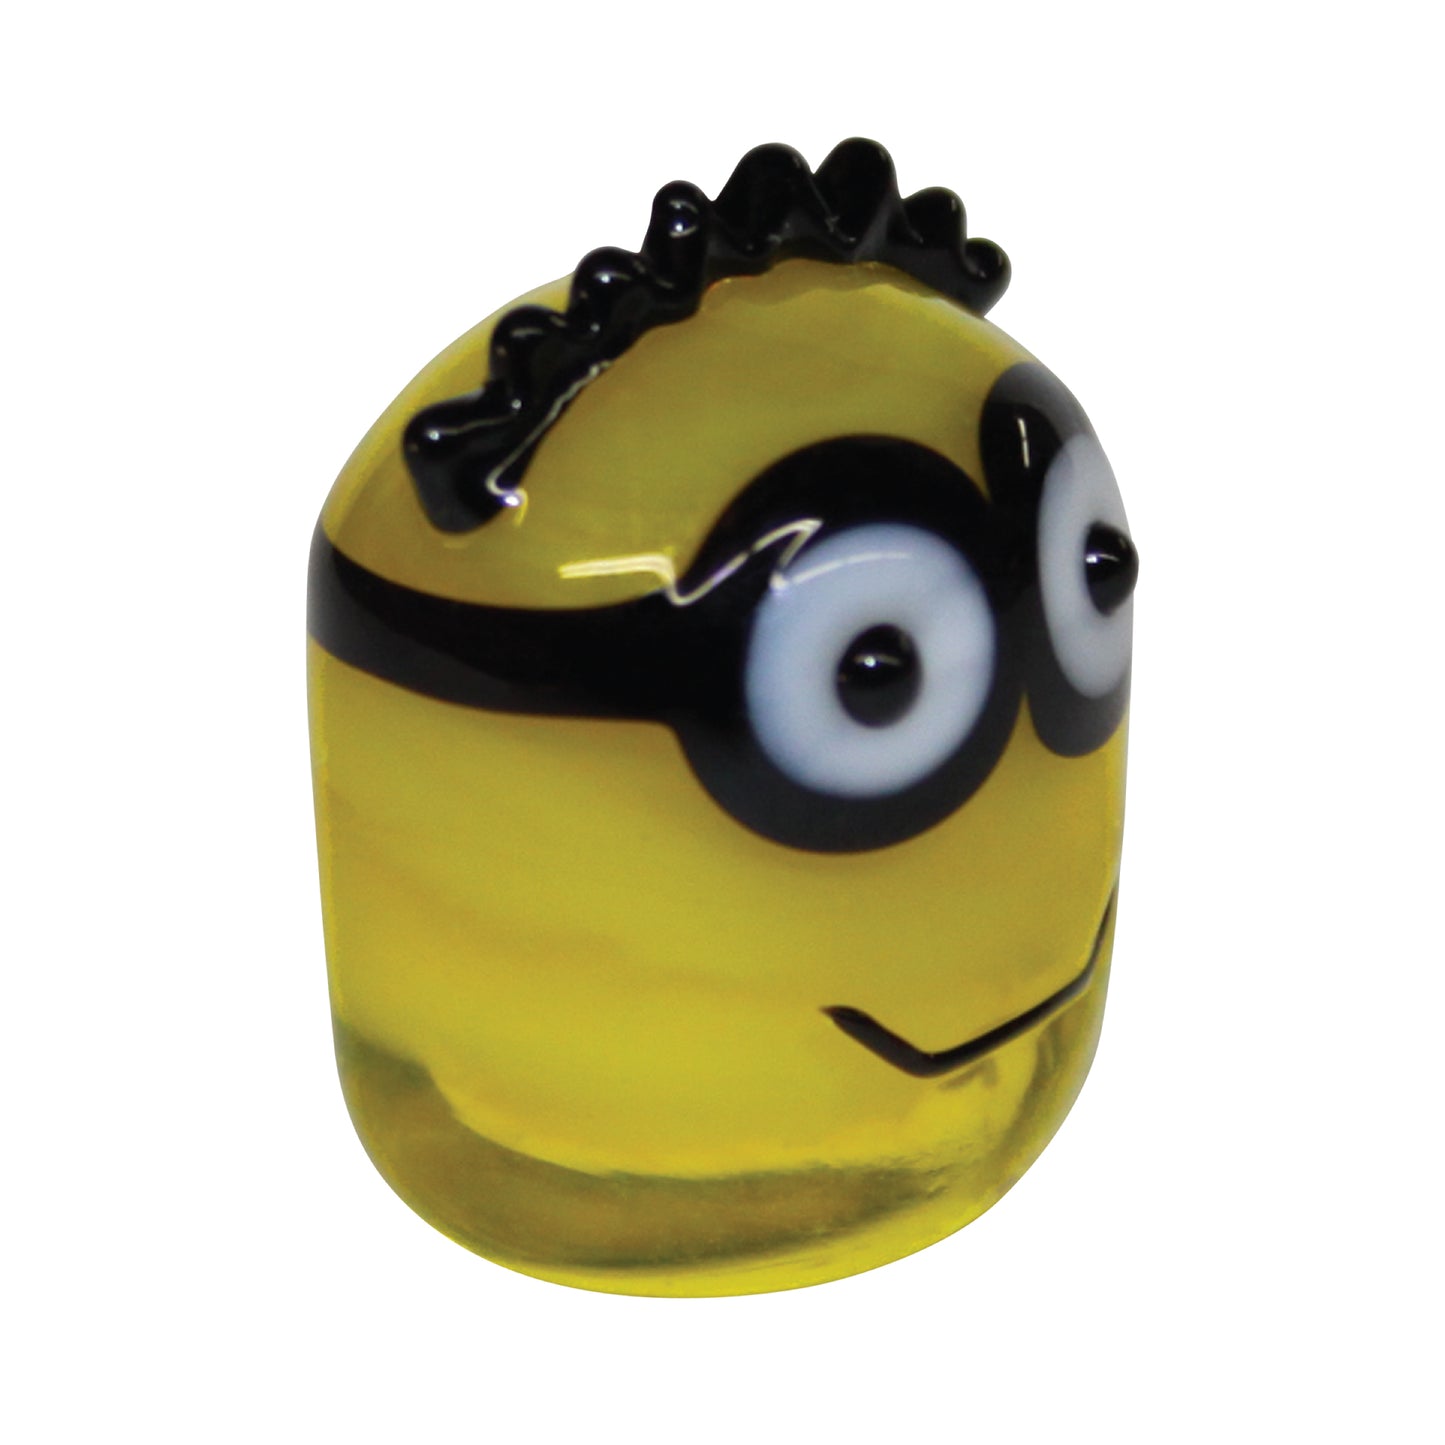 GlassWorld Despicable Me 2 Tom collectible miniature glass figurine Product Image